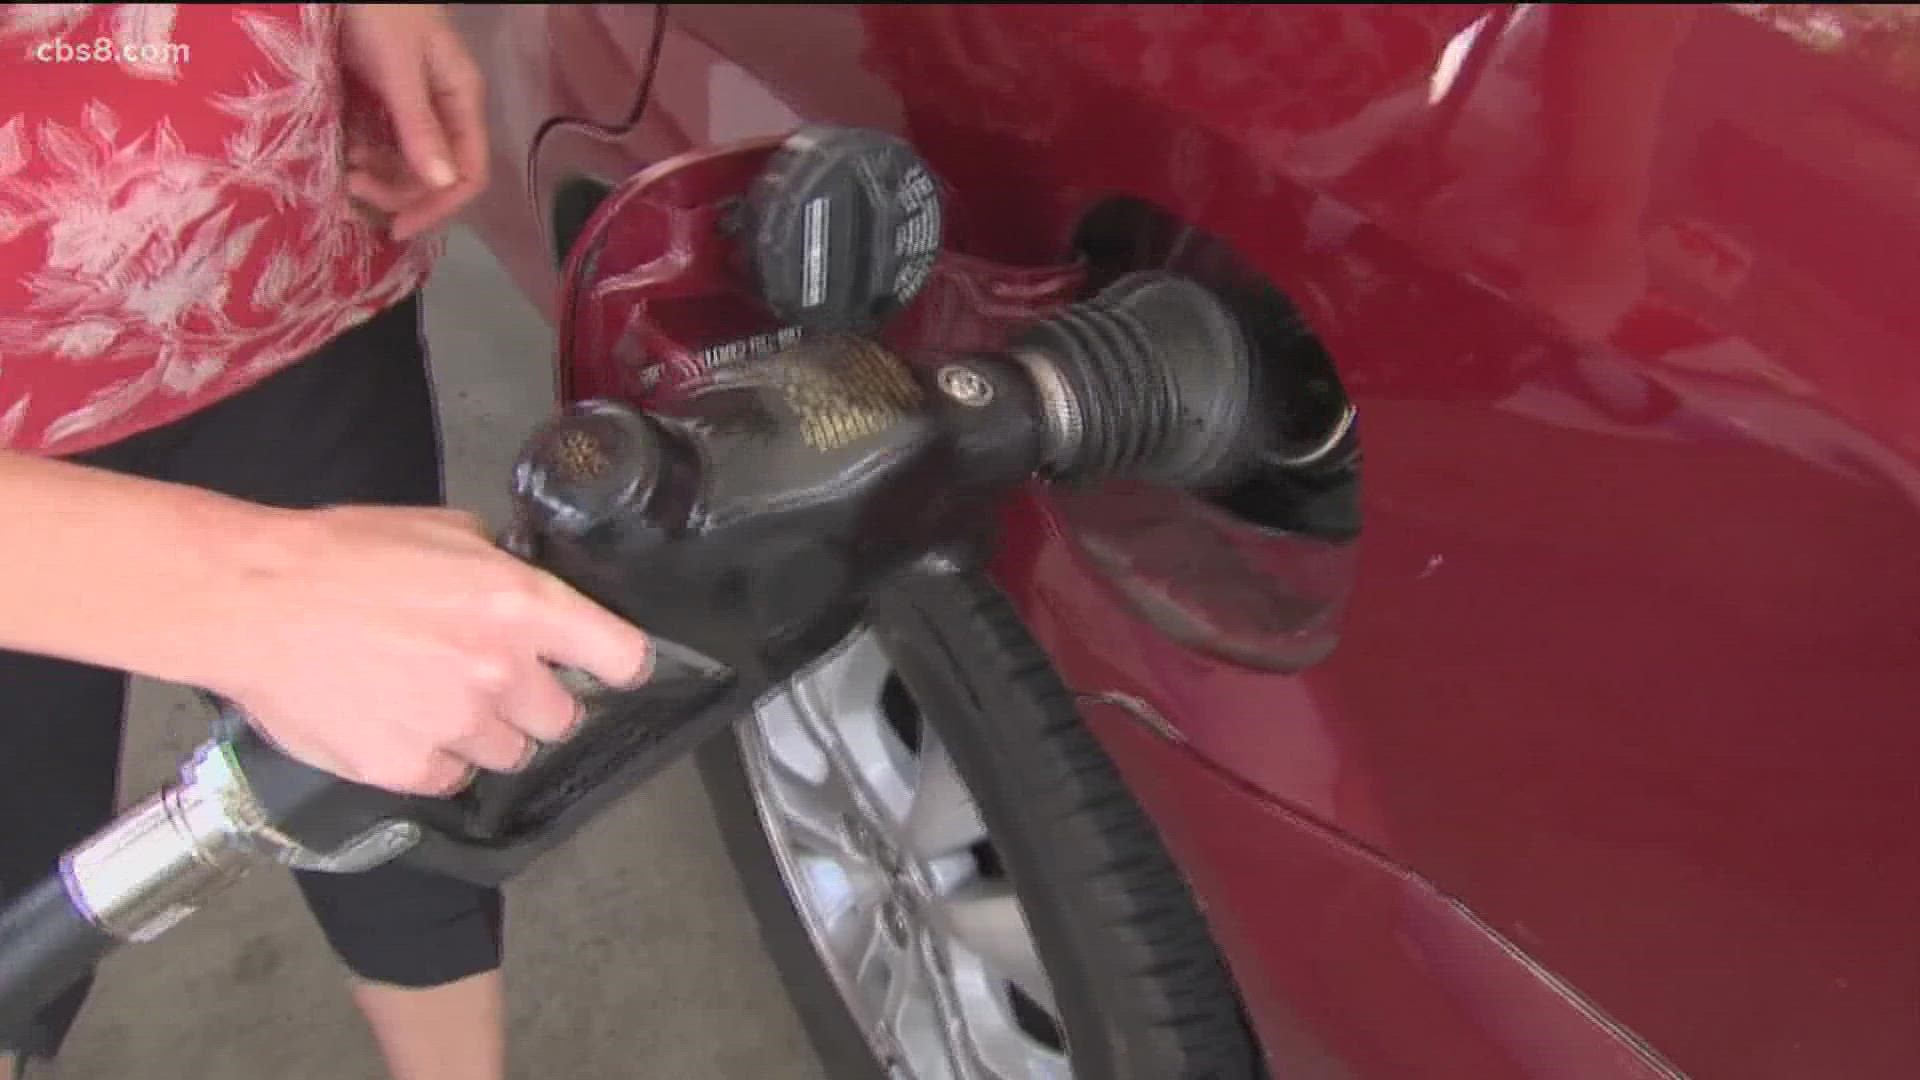 On Monday, Californians paid $1.60 more per gallon than the national average.